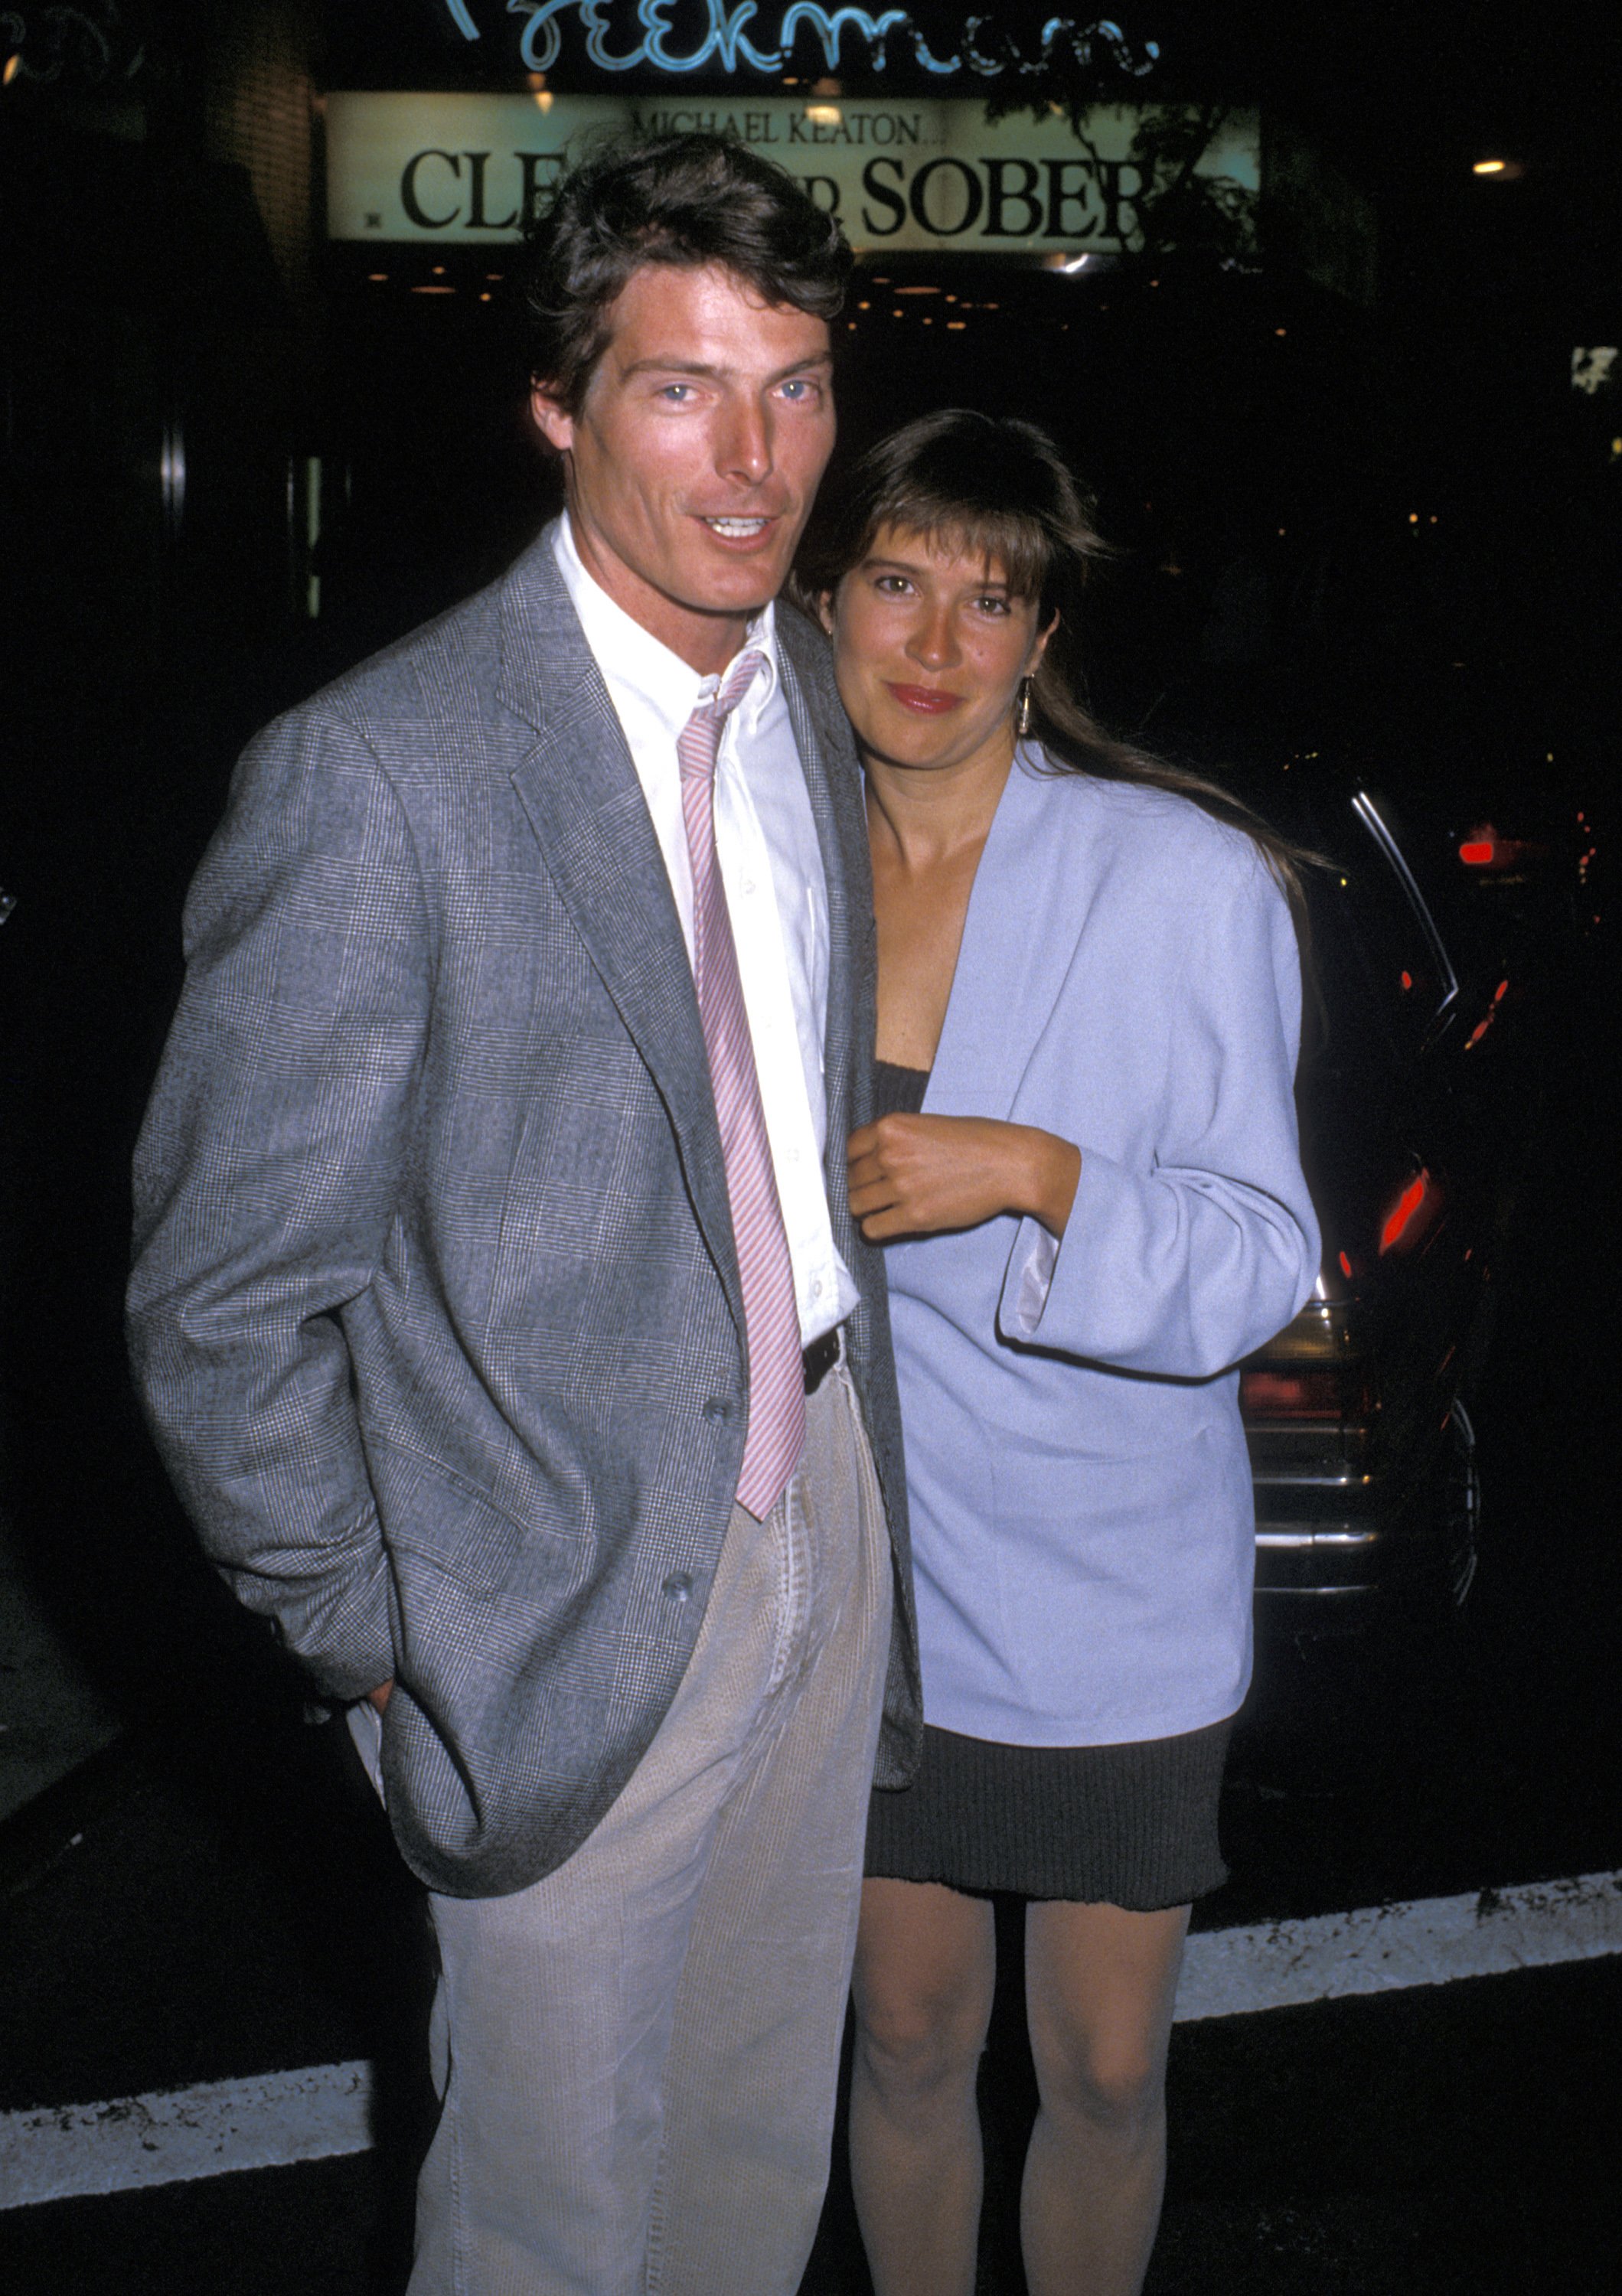 Christopher Reeve and Dana Reeve during "Running On Empty" New York City premiere at Beekman Theatre in New York City, New York. / Source: Getty Images